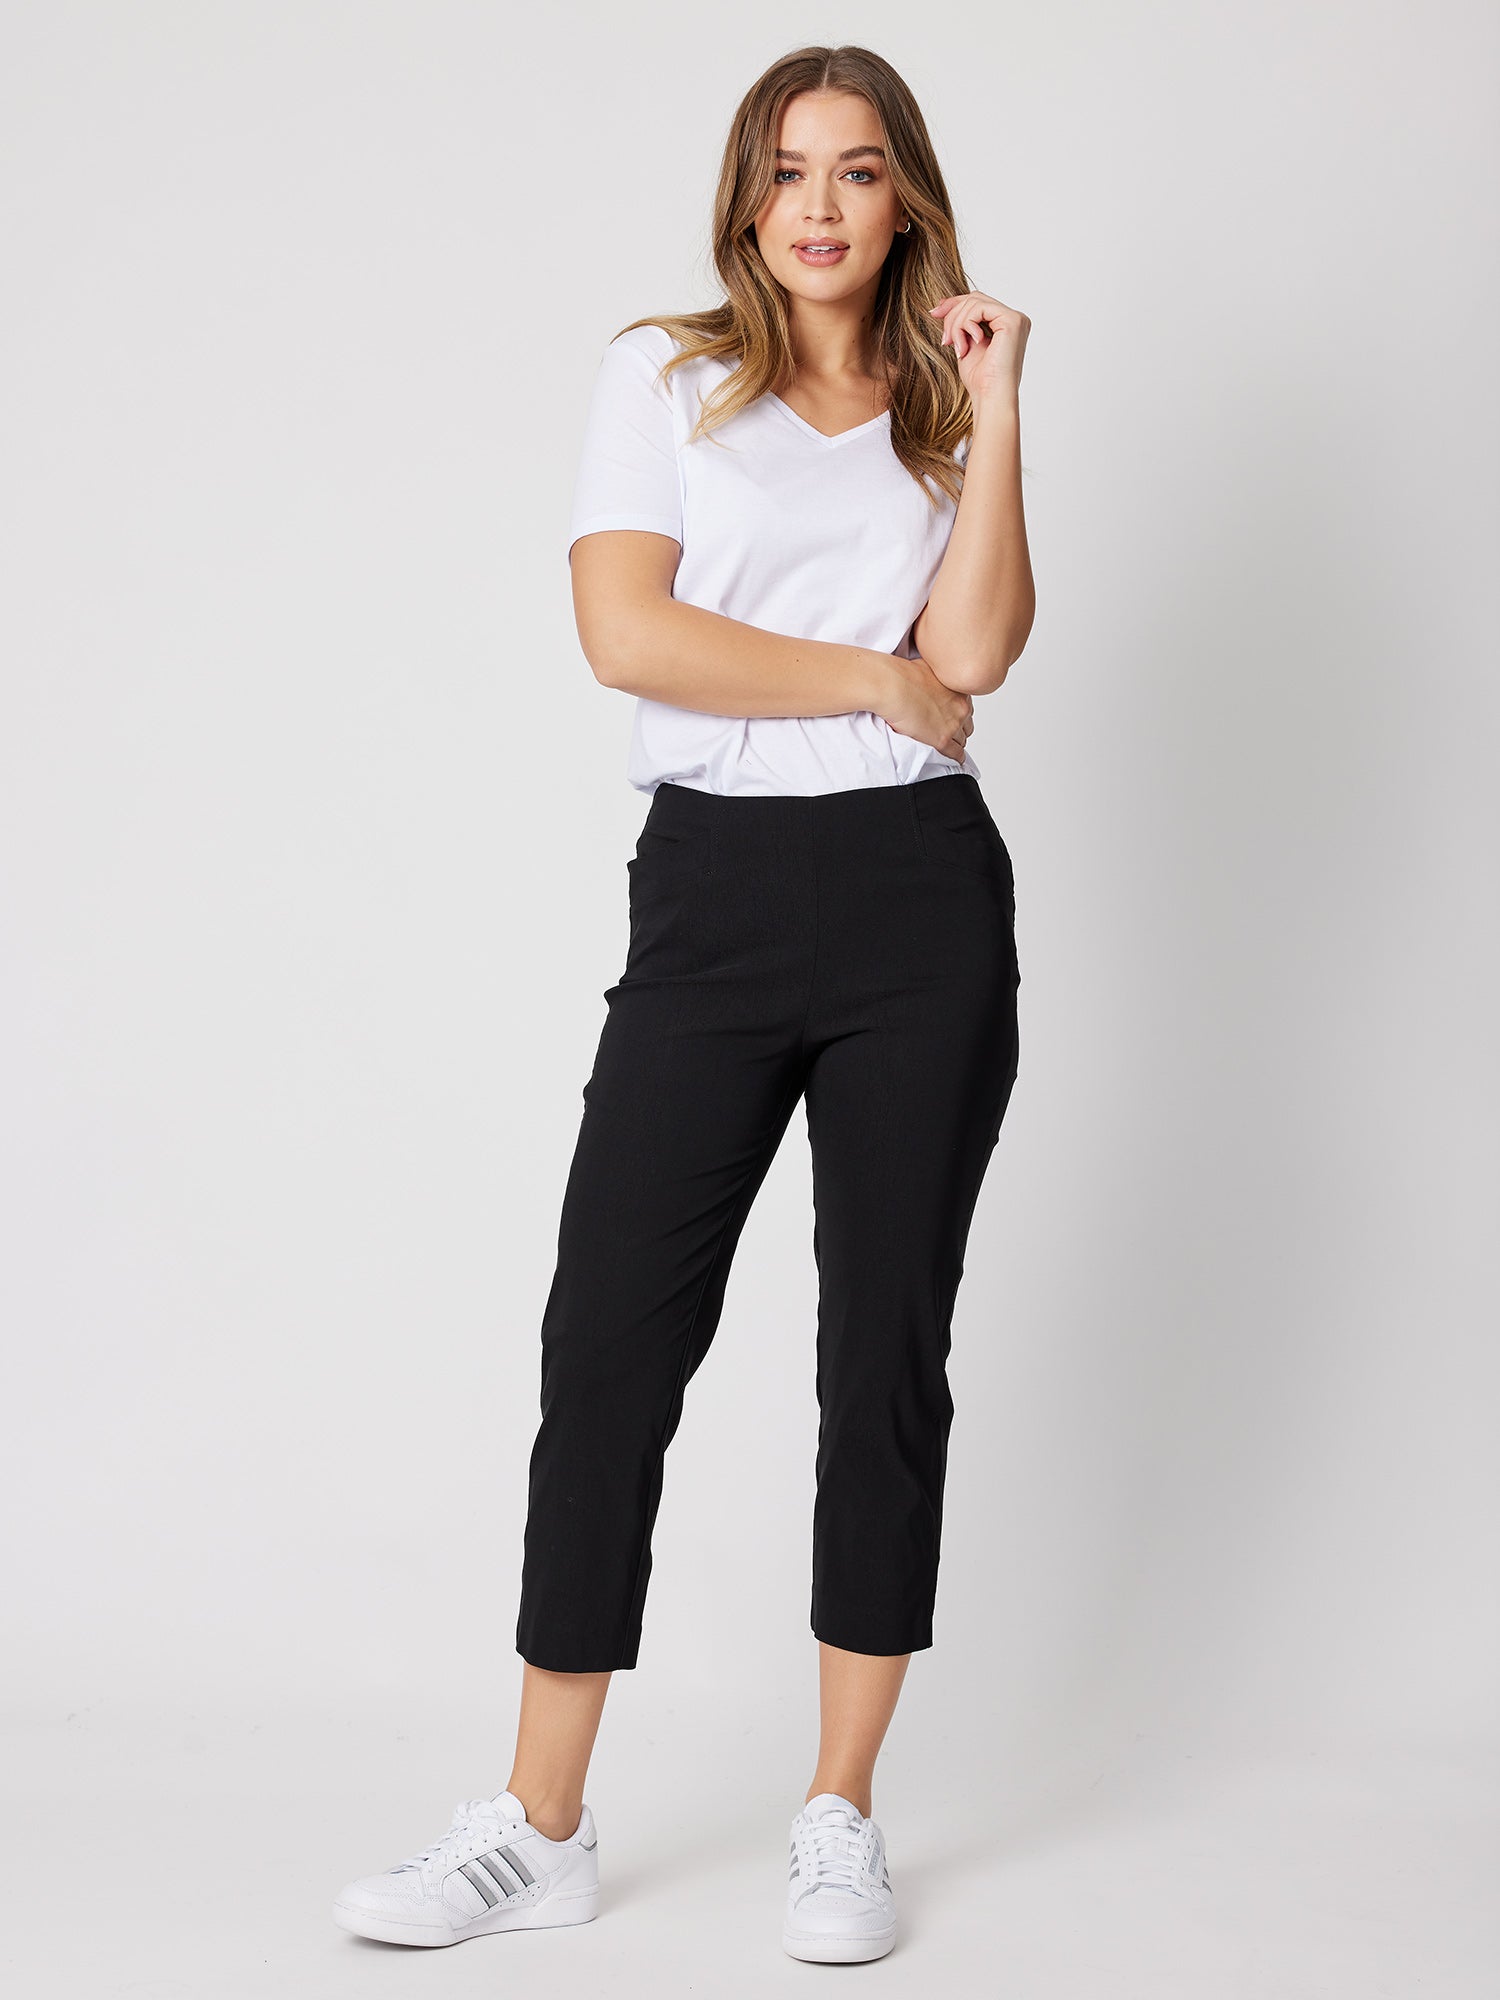 Stretch Bengaline Cropped Pull On Pant - Black